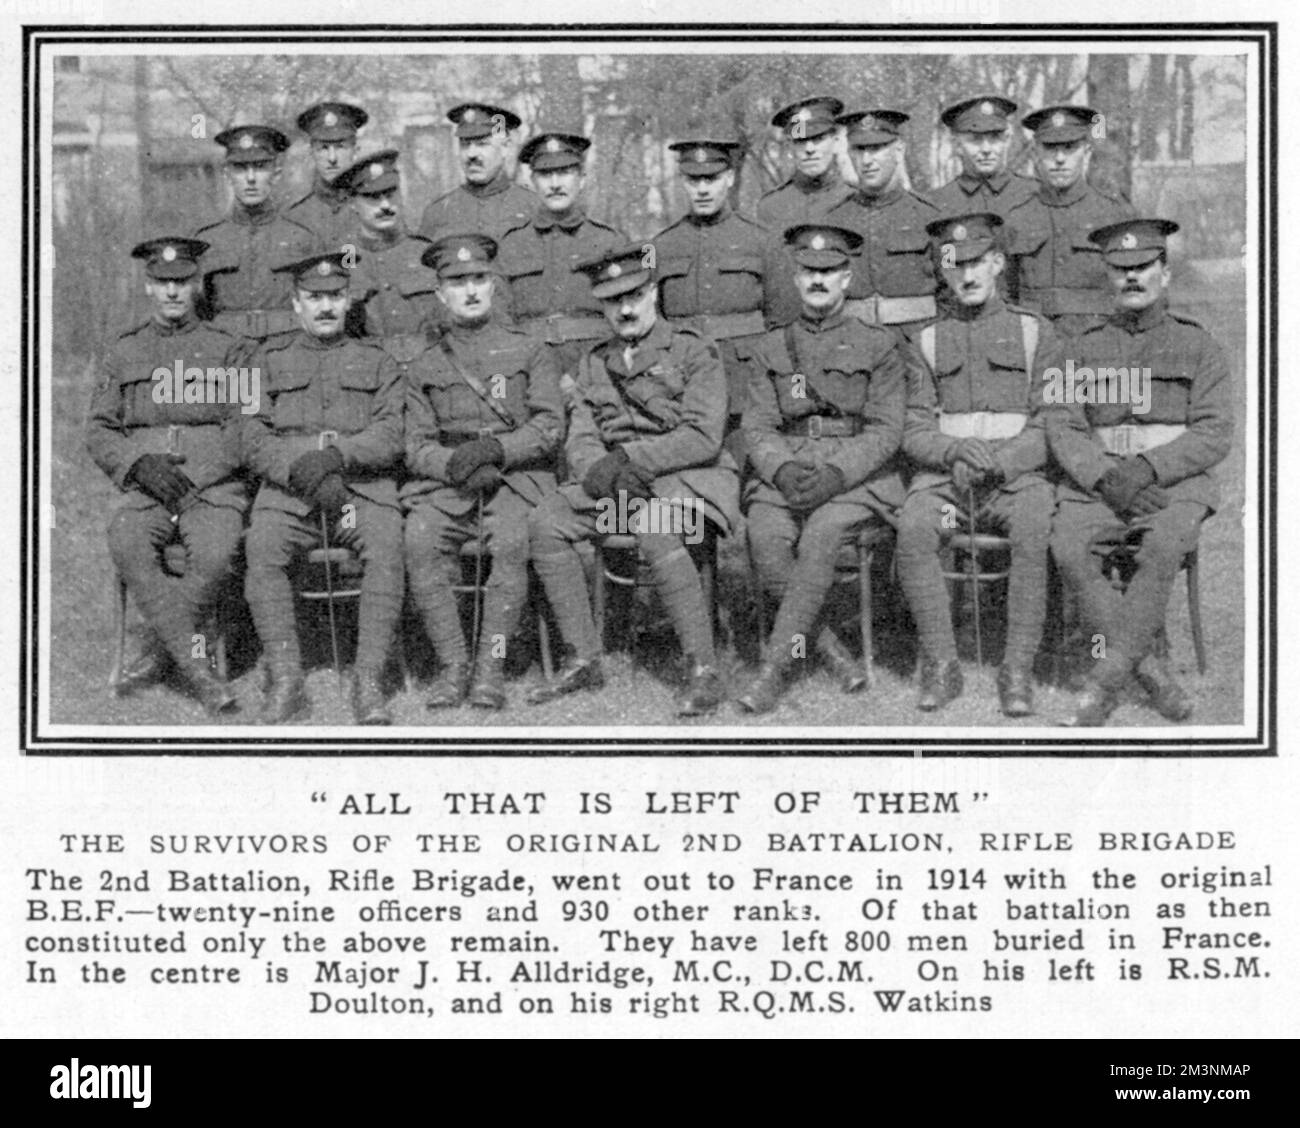 'All that is left of them', the survivors of the original 2nd Battalion, Rifle Brigade which went out to France in 1914 with the original BEF (British Expeditionary Force). They have left 800 men buried in France. In the centre is Major J H Alldridge, on his left RSM Doulton, on his right RQMS Watkins.     Date: 1919 Stock Photo